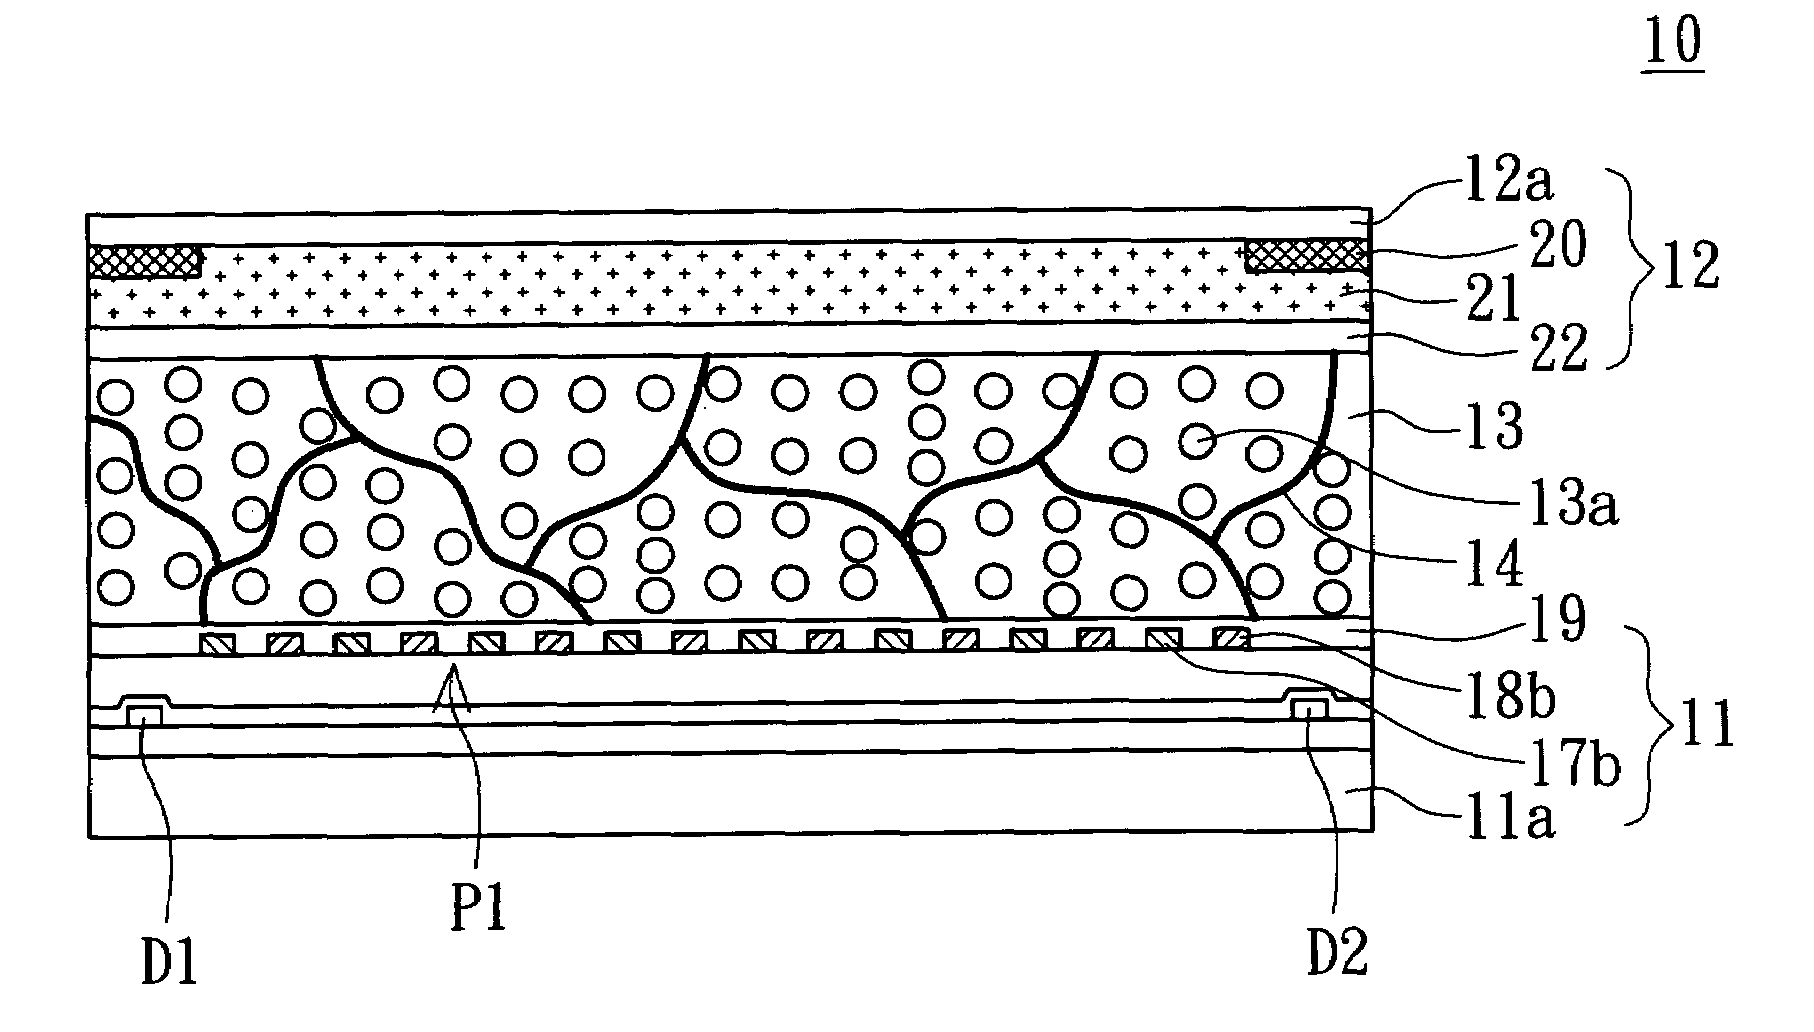 Fringe field switching LCD having smectic liquid crystal and utilizing alternate current squared wave driving voltage